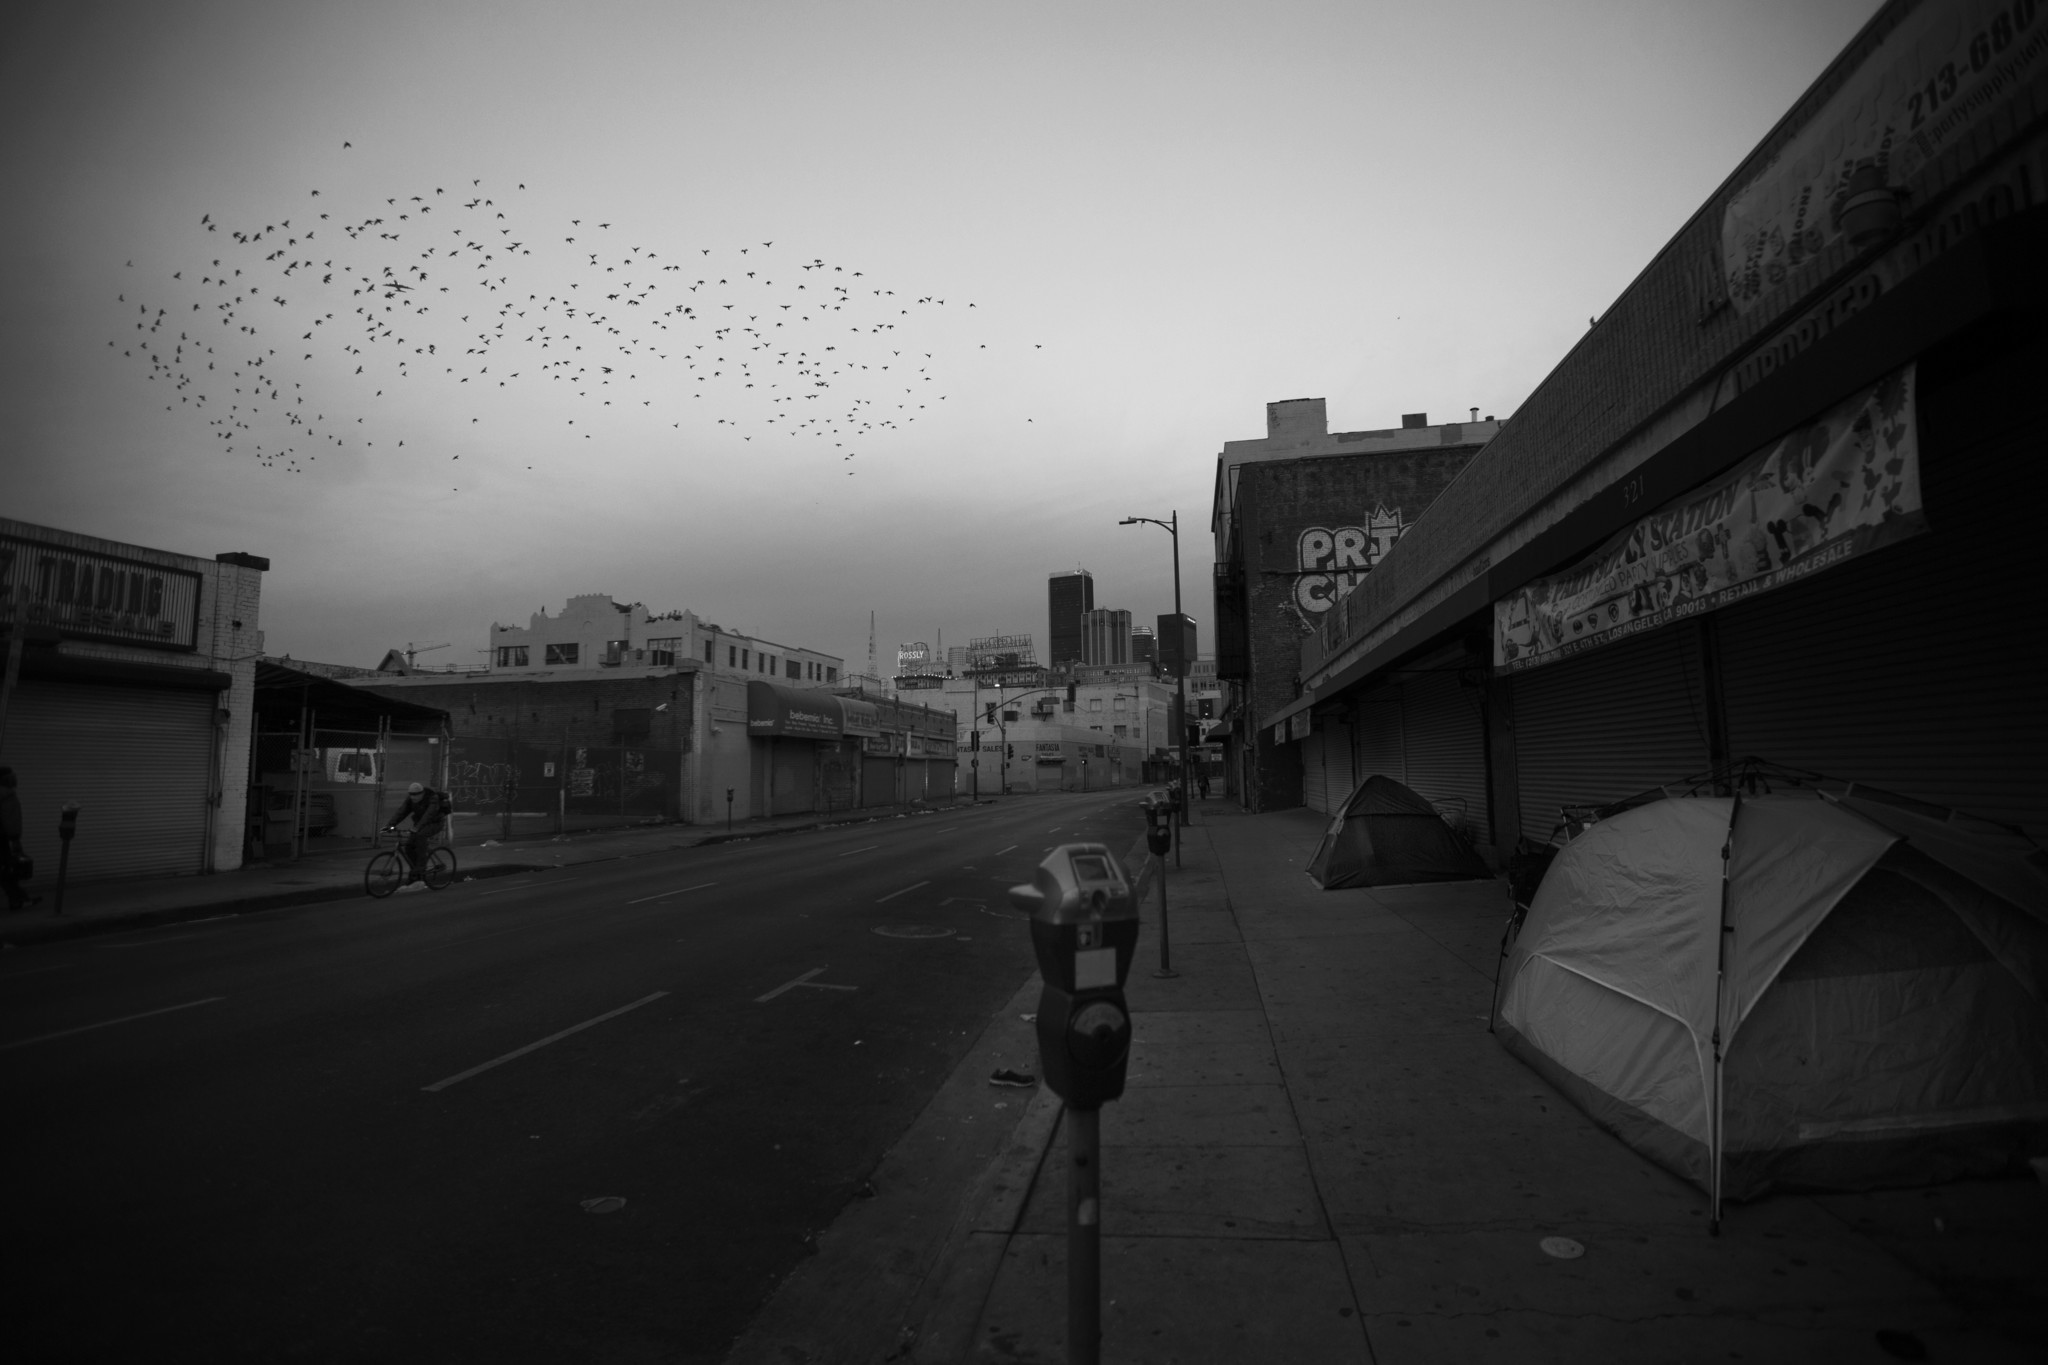 A flock of birds flies over a sidewalk encampment early one morning--as if they could lift up the m